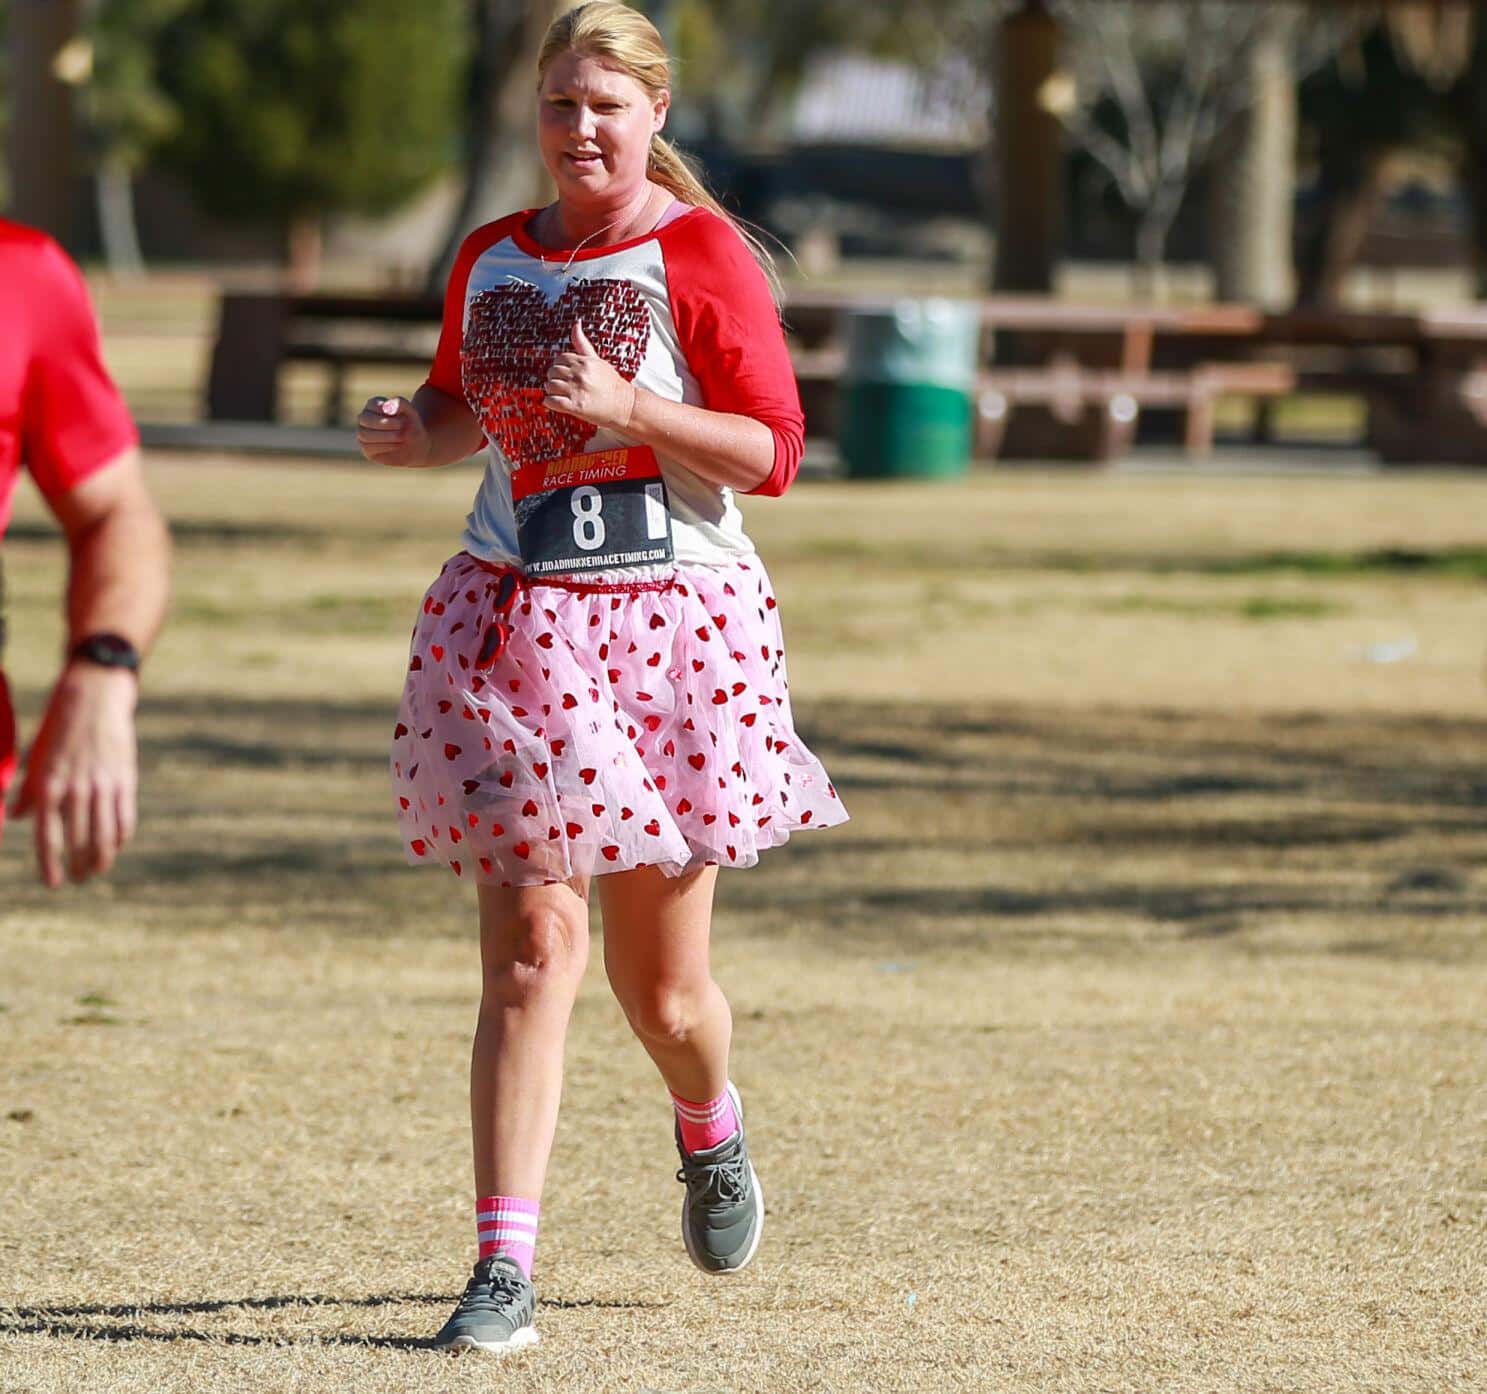 Dee Brady dressed up in Valentine's gear passes the finish line at the Cupid's Chase 5K Run on February 12, 2022 in Reid Park. Ana Beltran, Arizona Daily Star - tucson.com